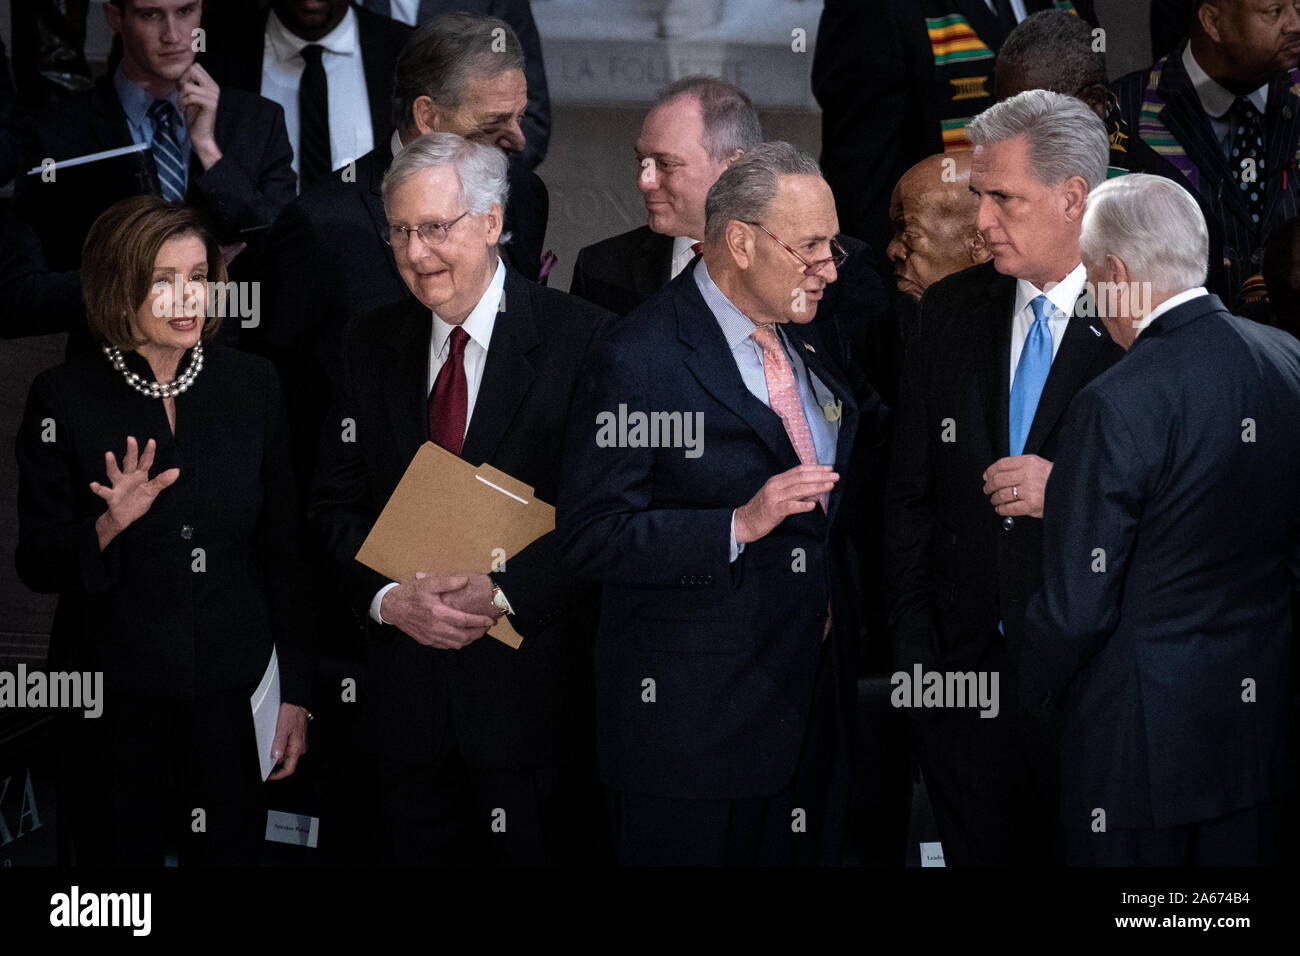 House Speaker Nancy Pelosi (D-CA) talks with Senate Majority Leader Mitch McConnell (R-KY) as Senate Minority Leader Chuck Schumer (D-NY) talks with House Minority Leader Kevin McCarthy (R-CA) and House Majority Leader Steny Hoyer (D-MD) before the start of a memorial service for late Maryland Representative Elijah Cummings in National Statuary Hall at the U.S. Capitol in Washington, DC on Thursday, October 24, 2019. Cummings died at the age of 68 on October 17 due to complications concerning long-standing health challenges. Pool Photo by Erin Schaff/UPI Stock Photo